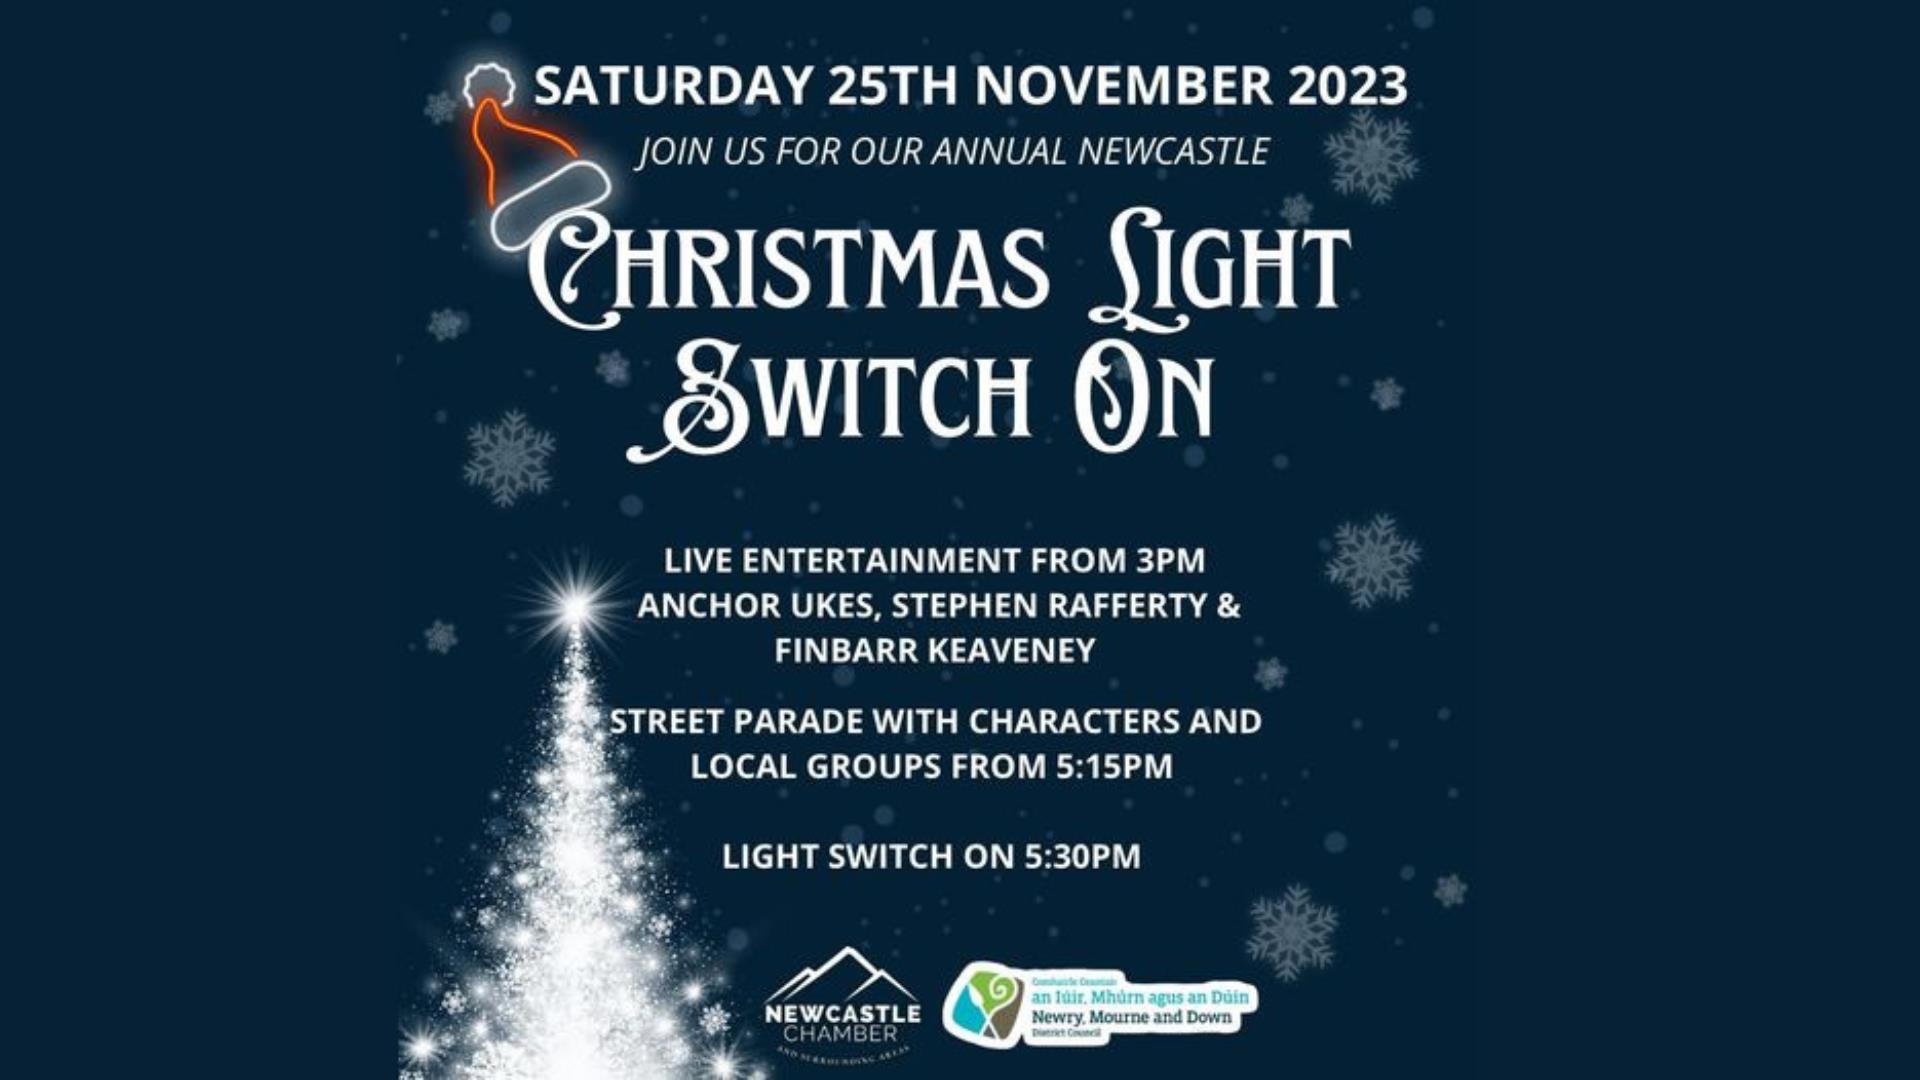 Poster displaying the details for the Newcastle (County Down) Christmas Lights Switch on event on Saturday 26 November 2023 from 3pm.